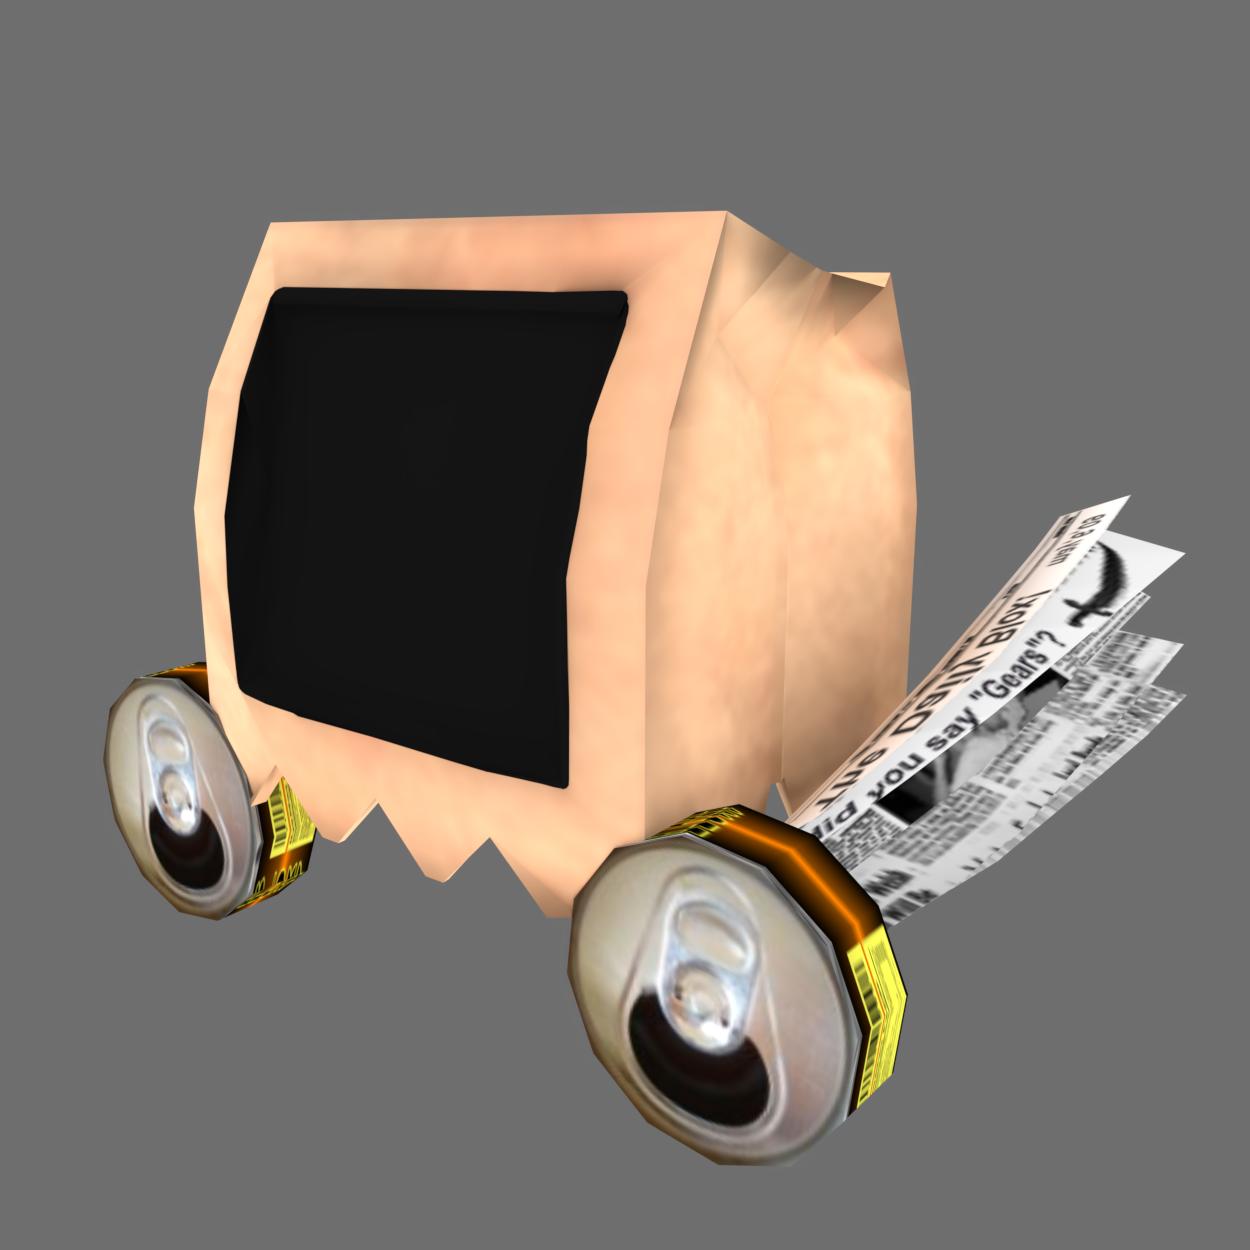 UGC concept : Noob head i made in blender and imported to roblox